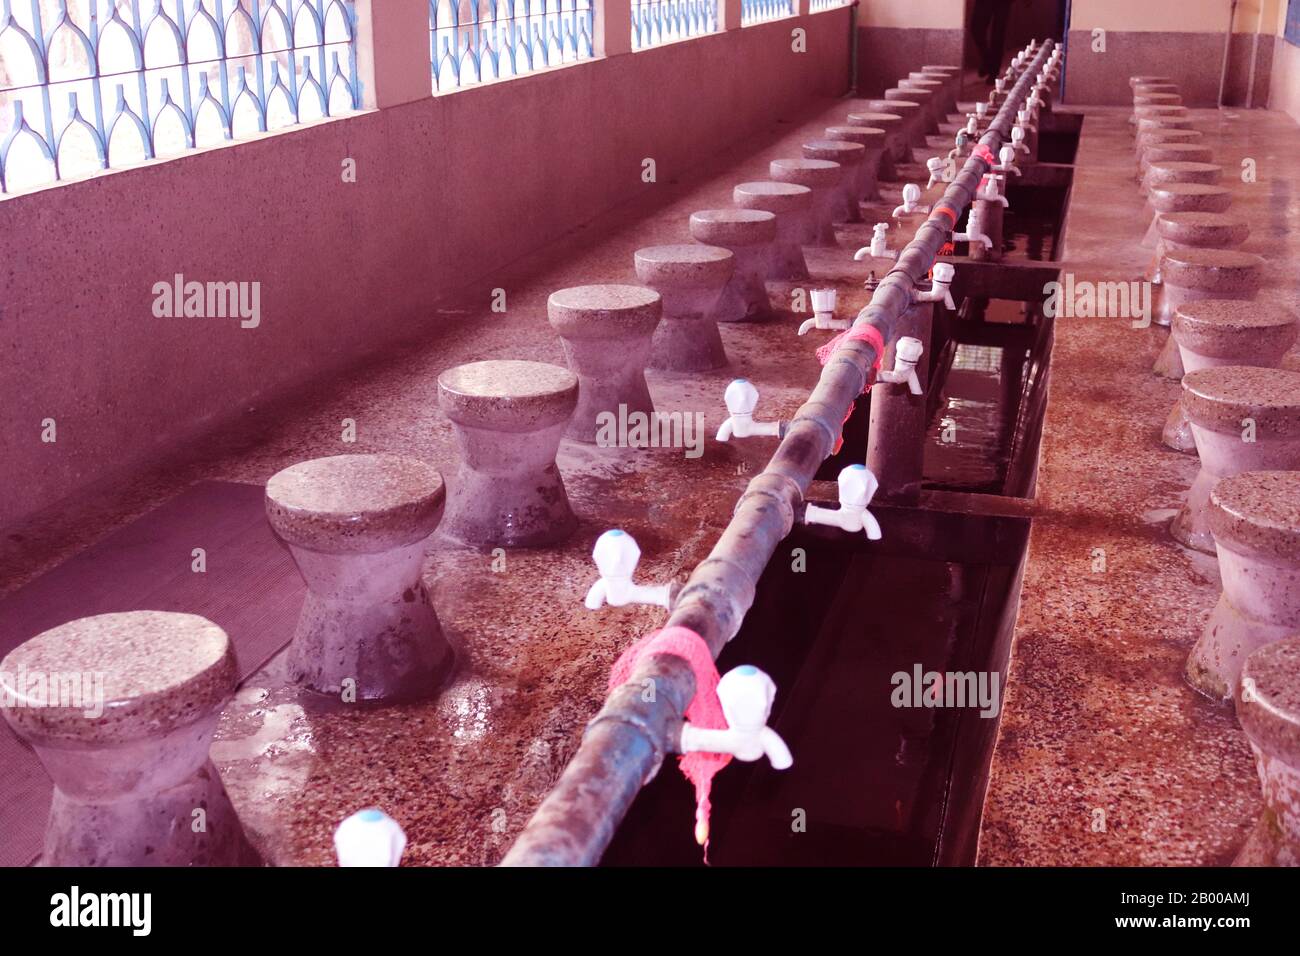 Muslim Ablution for Pray. Fountains for ablution in the Carmichael College Mosque.Water Tab for Wadu.The Wudu or Ablution area for muslim.Ablution pla Stock Photo